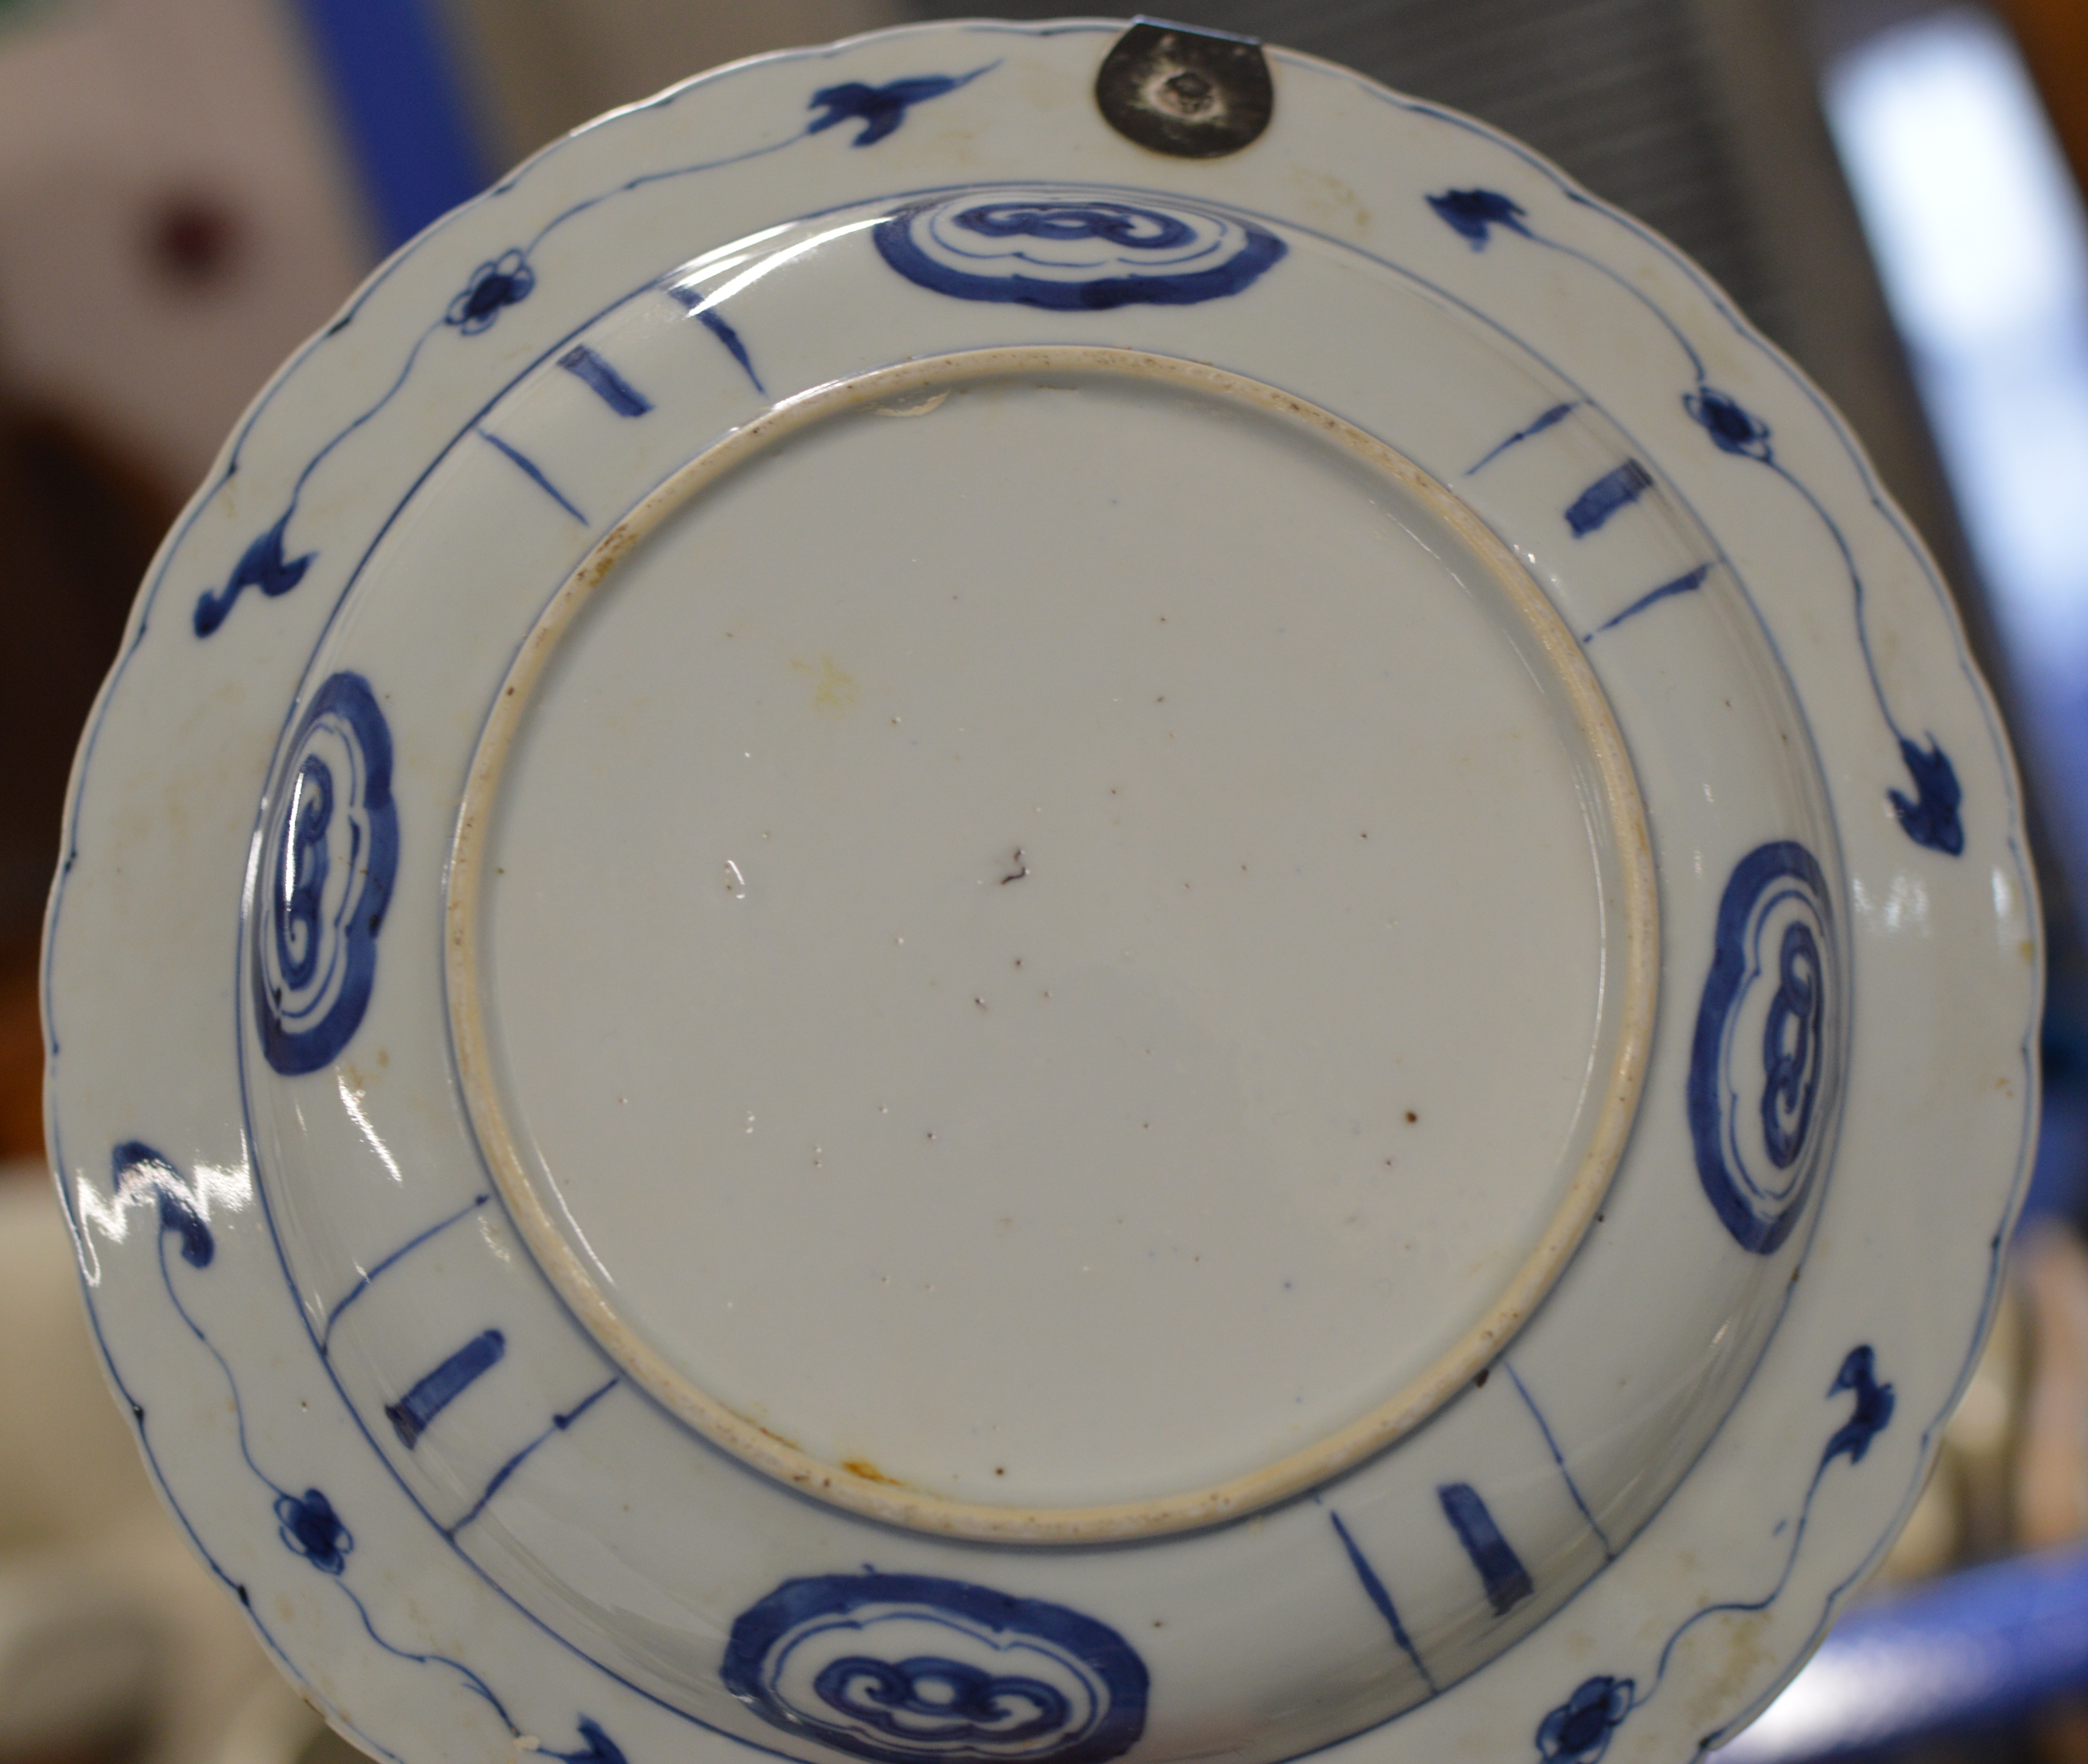 8½" DIAMETER OLD CHINESE BLUE & WHITE PORCELAIN BOWL WITH LATER APPLIED SILVER MOUNTS - Image 3 of 3